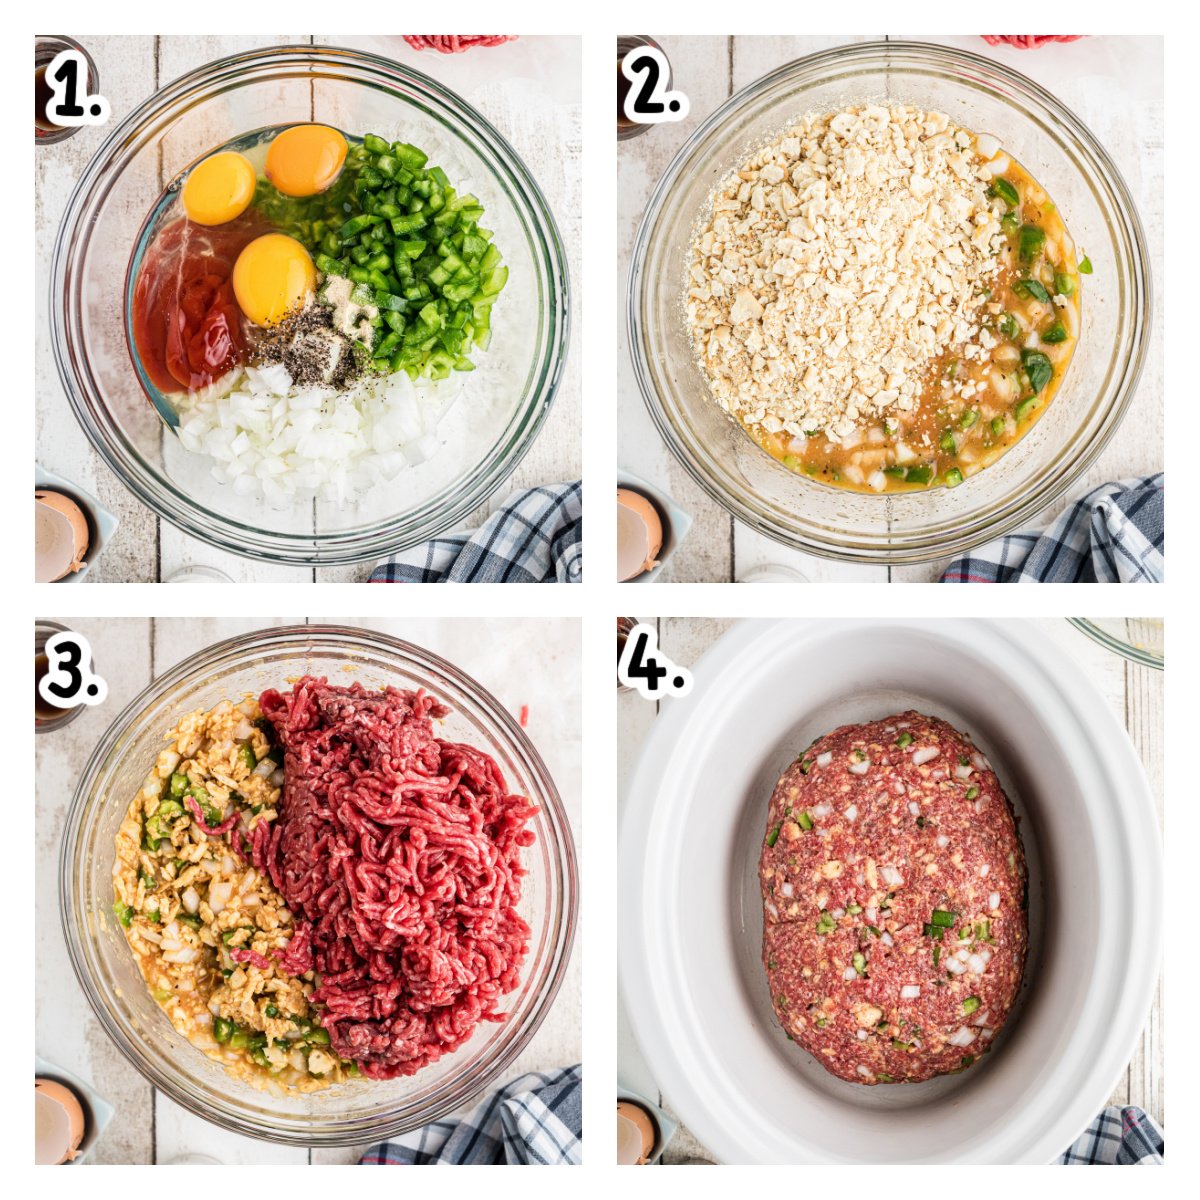 Four images showing how to prepare meatloaf and put in the slow cooker.